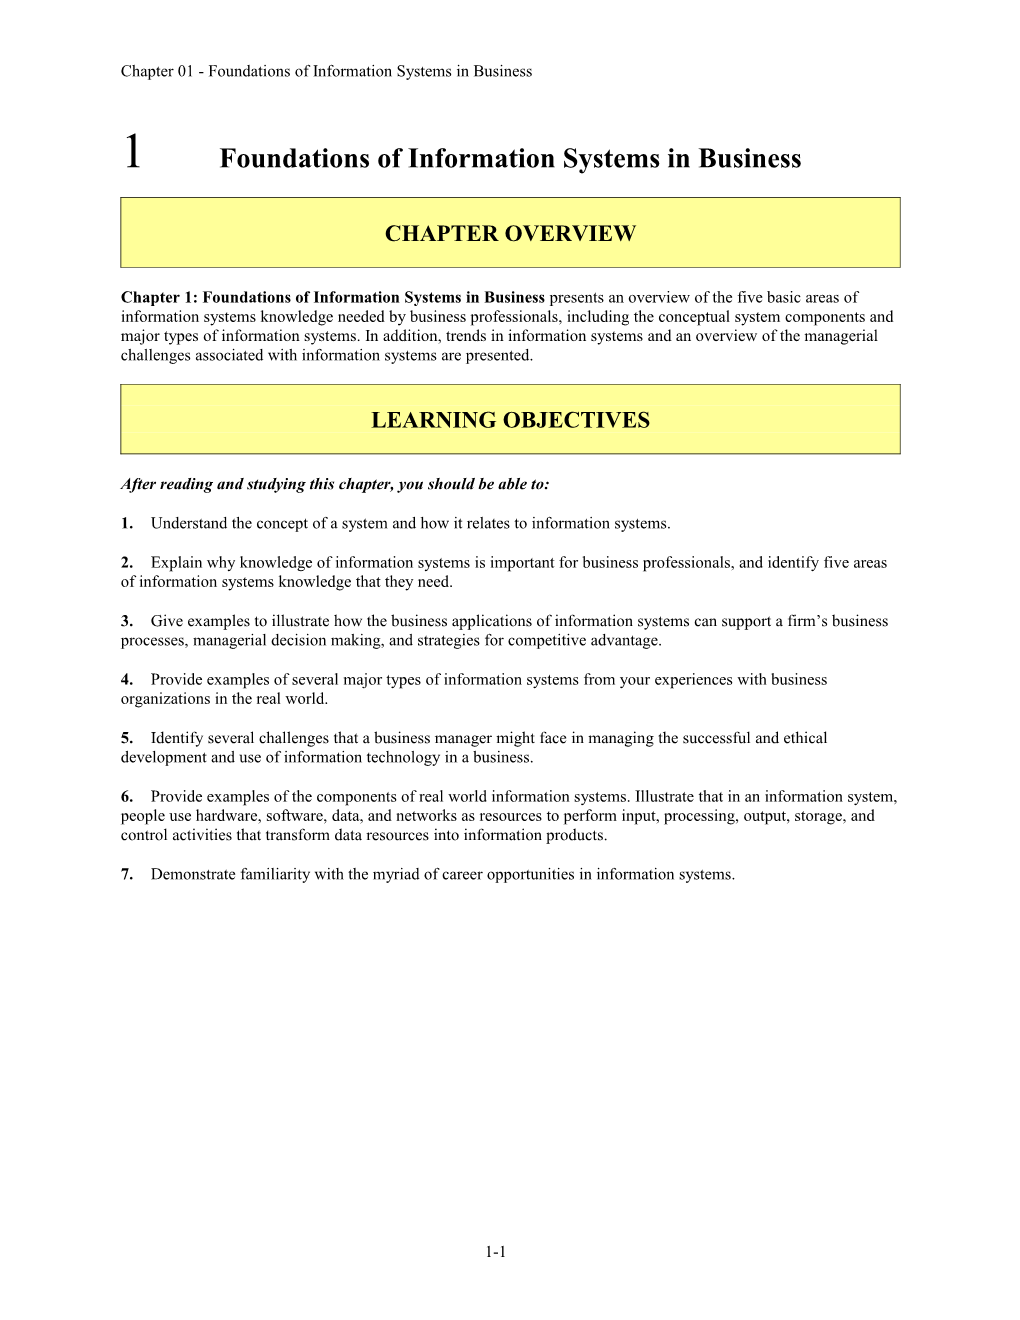 Chapter 01 - Foundations of Information Systems in Business